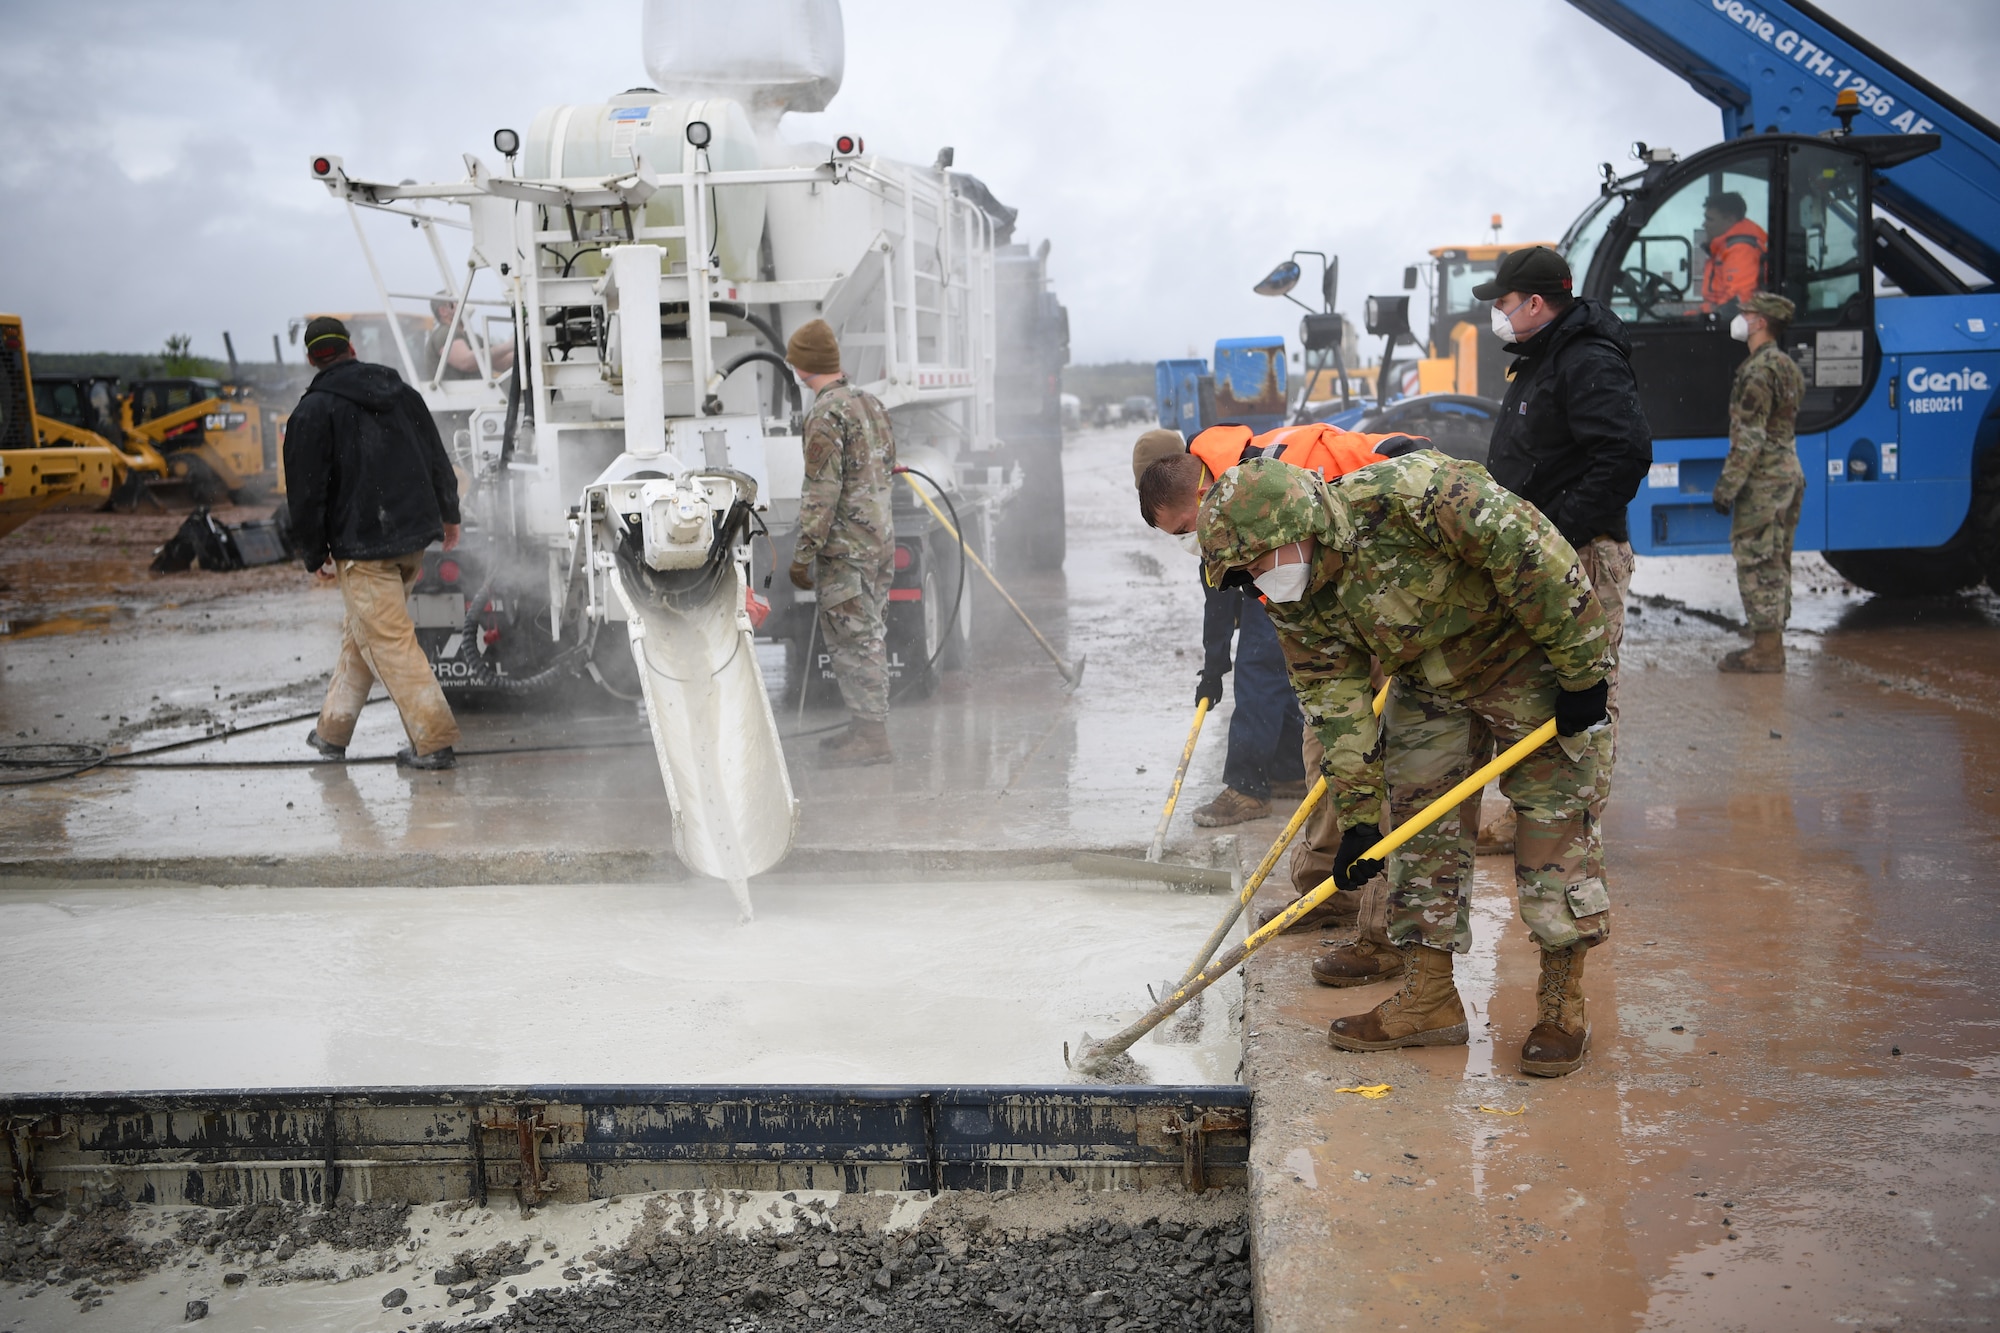 U.S. Air Force airmen smooth concrete as it's poured at Ramstein Air Base, Germany, May 11, 2021. Agile Combat Employment ensures U.S. Air Forces in Europe, along with allies and partners, are ready for potential short or no-notice contingencies by allowing forces to operate from locations with varying levels of capacity and support. This ensures Airmen and aircrews are postured to respond across a spectrum of military operations. (U.S. Air Force photo by Airman 1st Class Alexcia Givens)